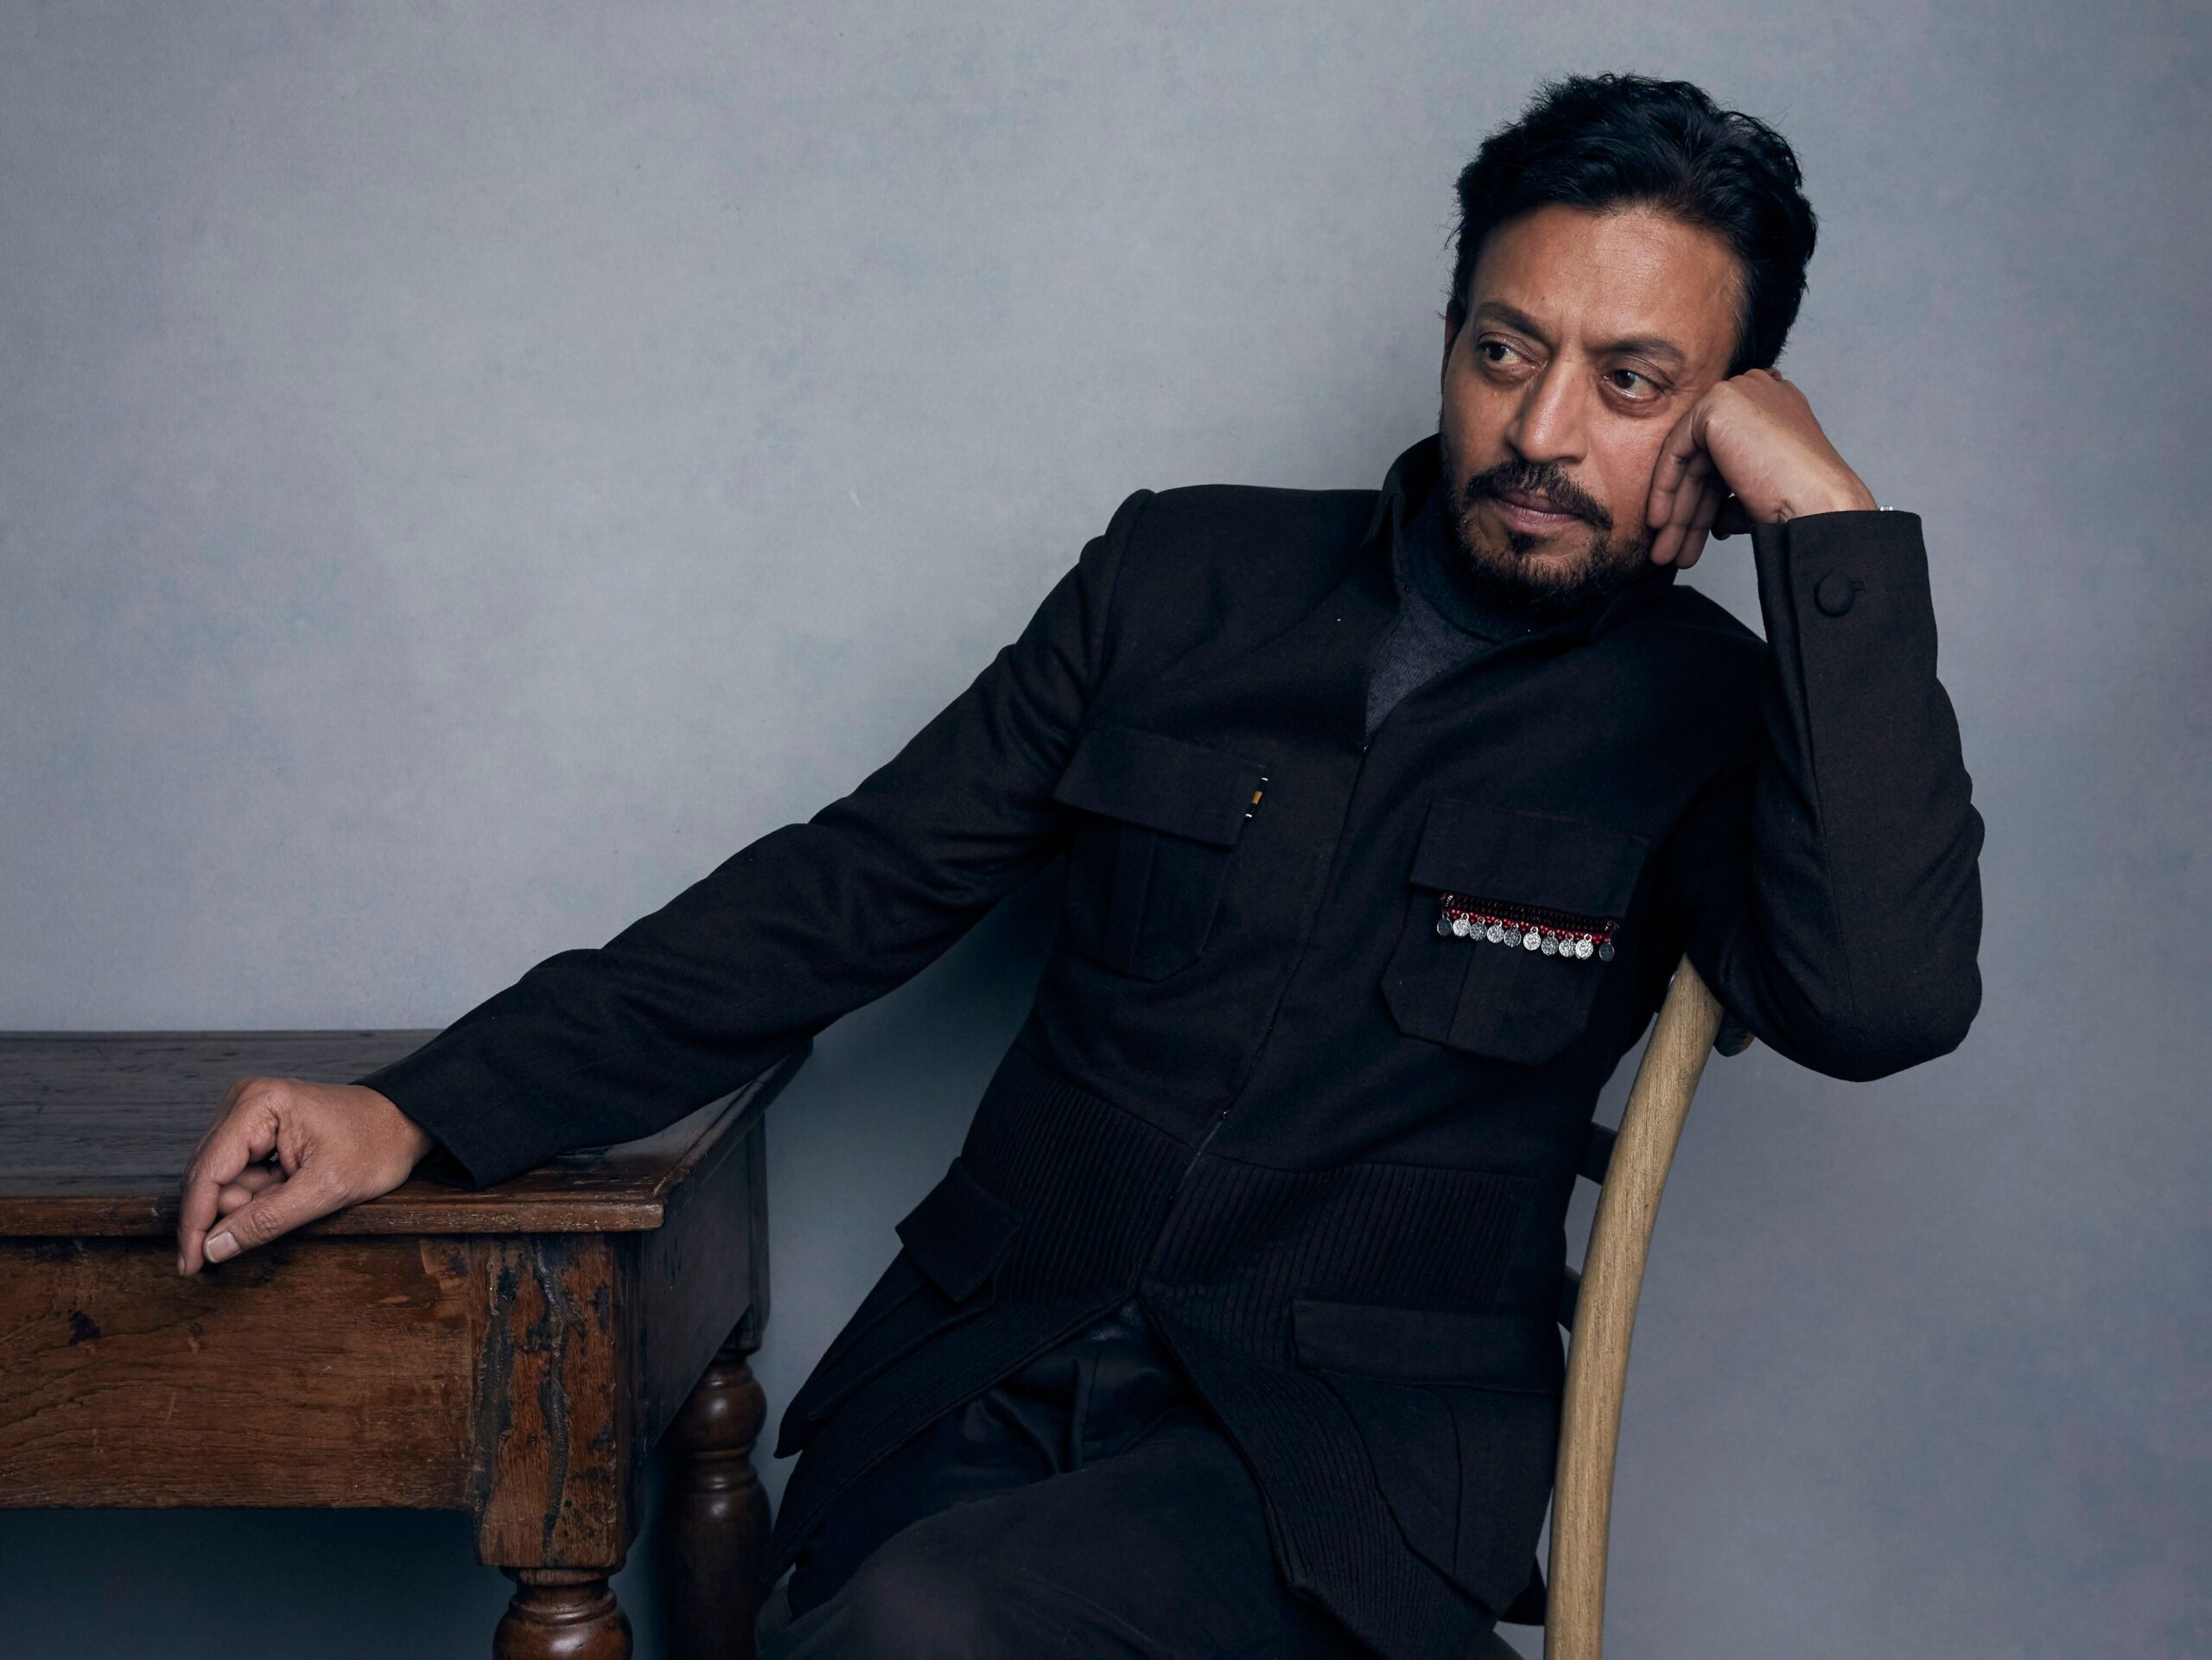 Mandatory Credit: Photo by Taylor Jewell/Invision/AP/Shutterstock (9794675b)
Actor Irrfan Khan poses for a portrait to promote the film "Puzzle" during the Sundance Film Festival in Park City, Utah. Khan has appeared in films such as "Slumdog Millionaire" and "Jurassic World," but now the actor is facing the biggest challenge of his life as he undergoes treatment for cancer in London
Film Irrfan Khan, Park City, USA - 22 Jan 2018